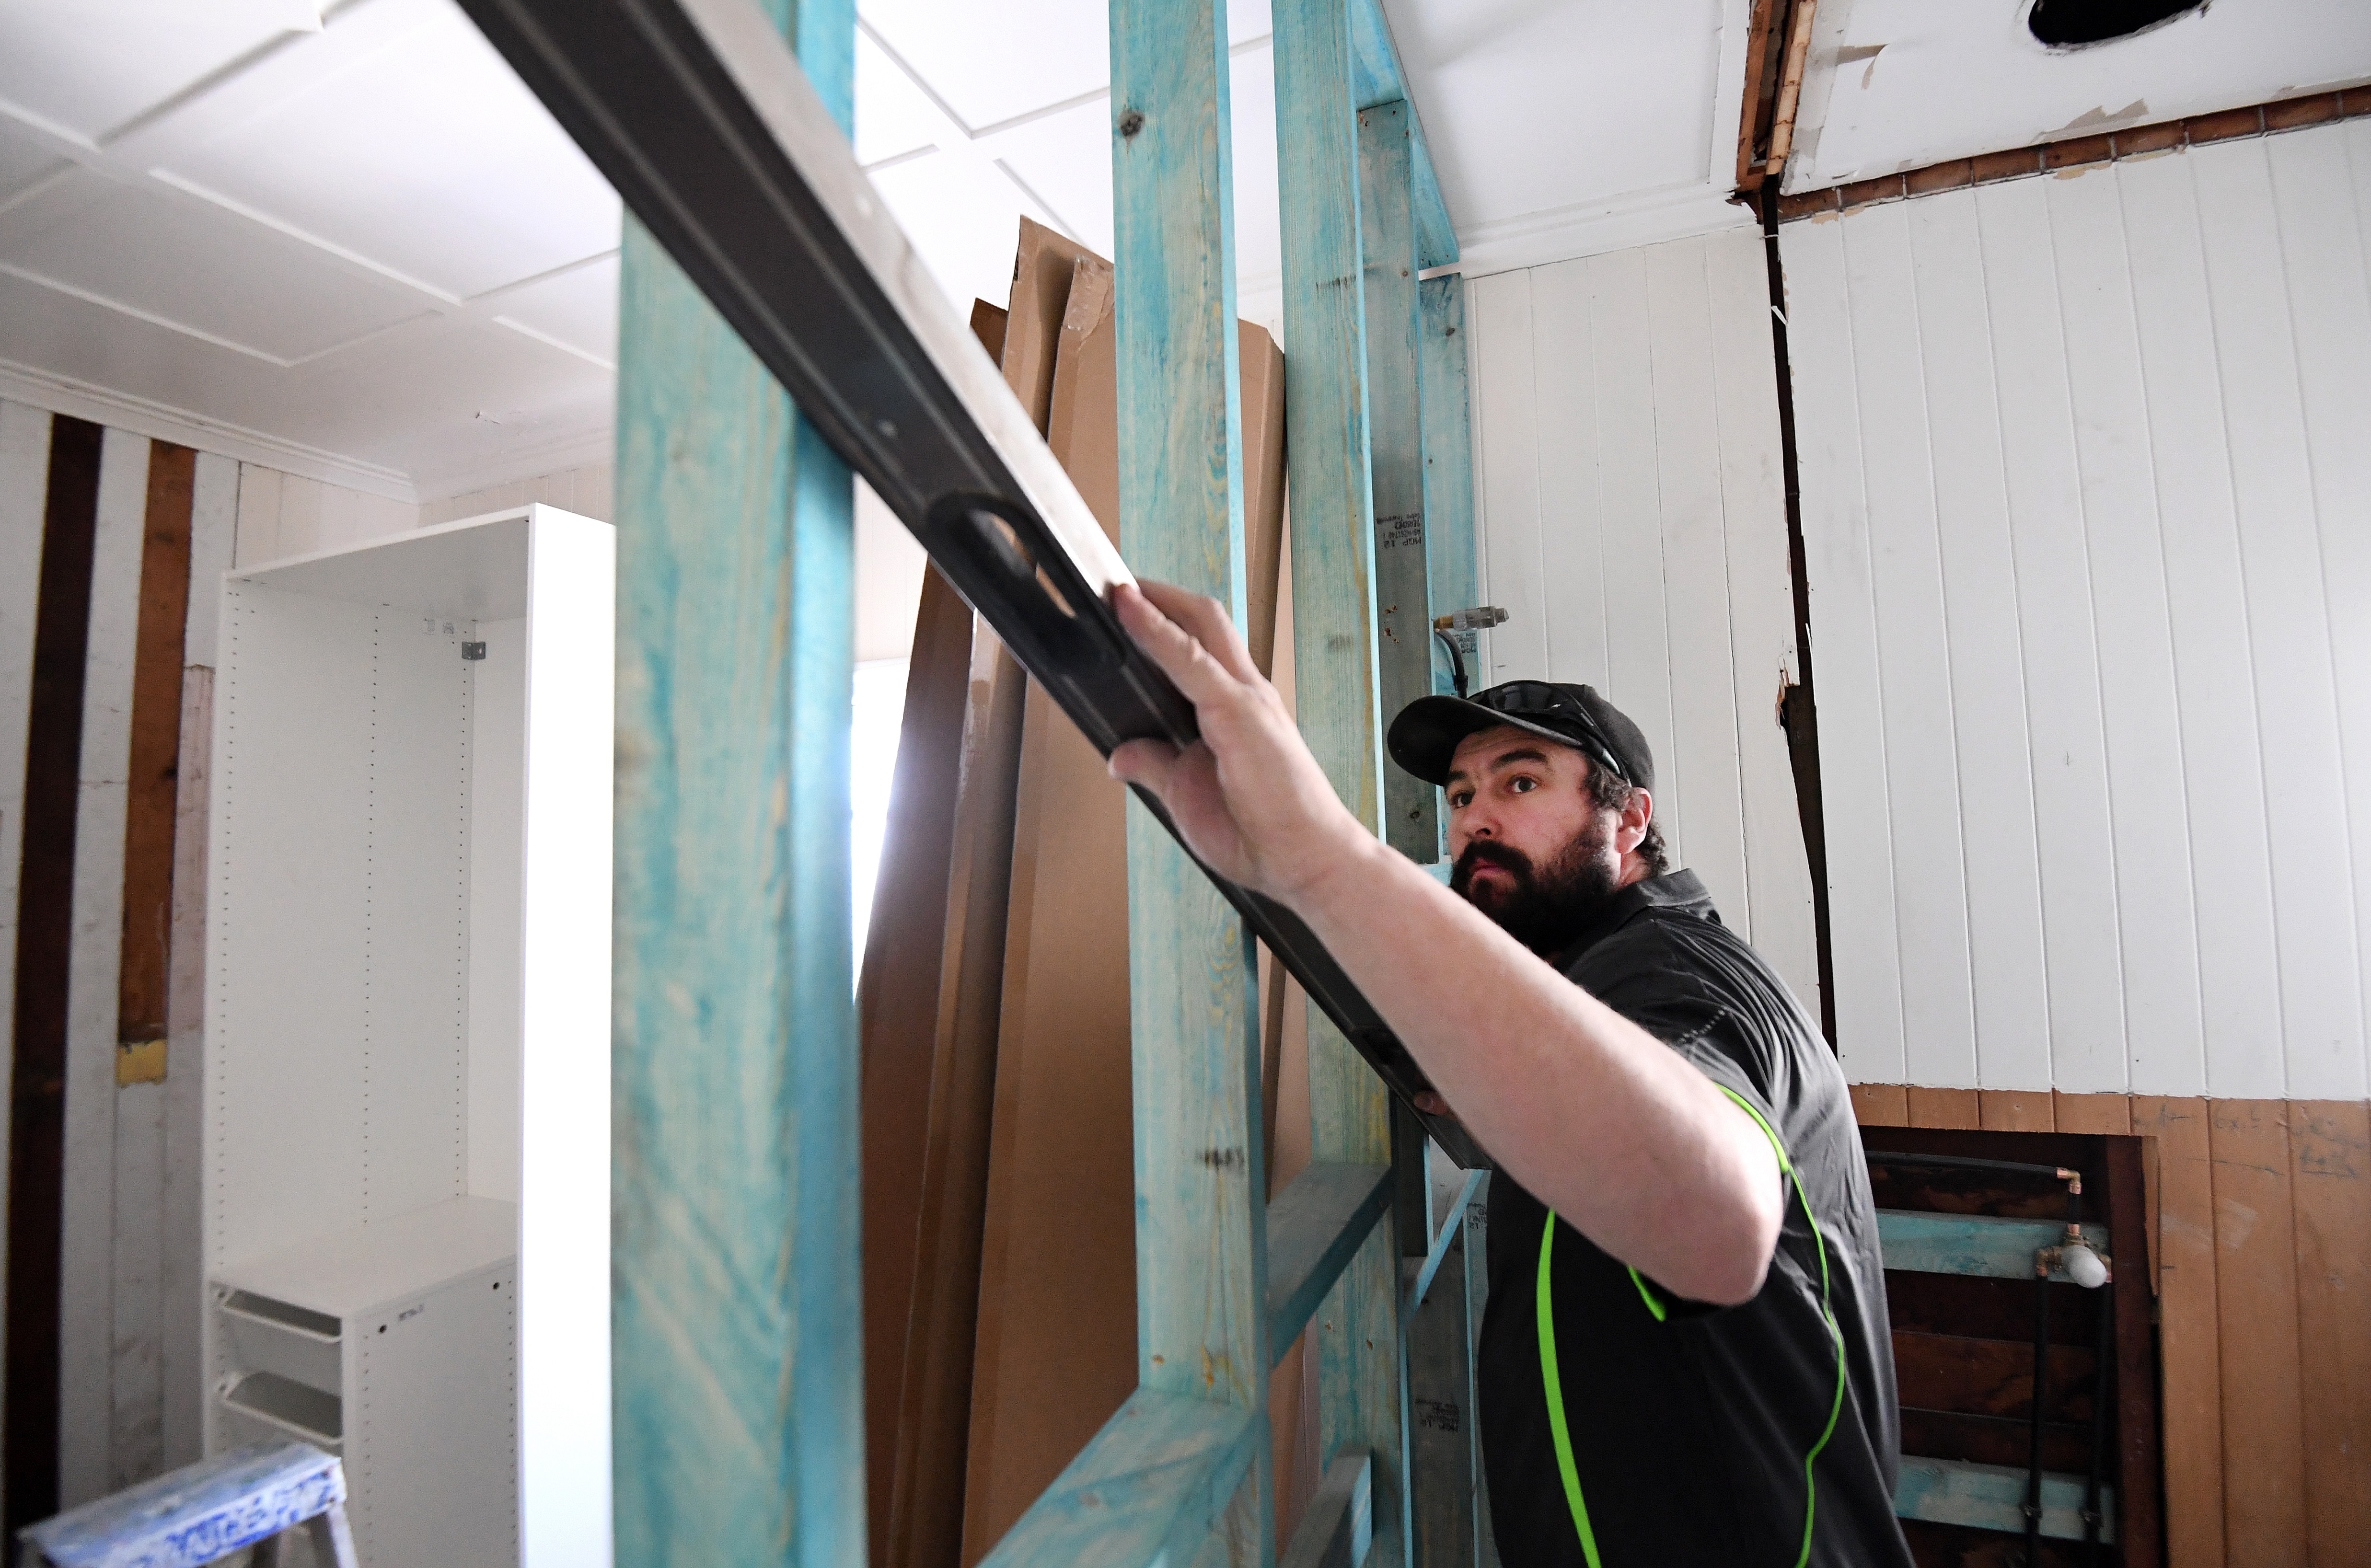 The Federal Government will give eligible Australians $25,000 to build or substantially renovate their homes, in an effort to boost demand in the construction sector and keep builders employed. (AAP Image/Dan Peled) NO ARCHIVING